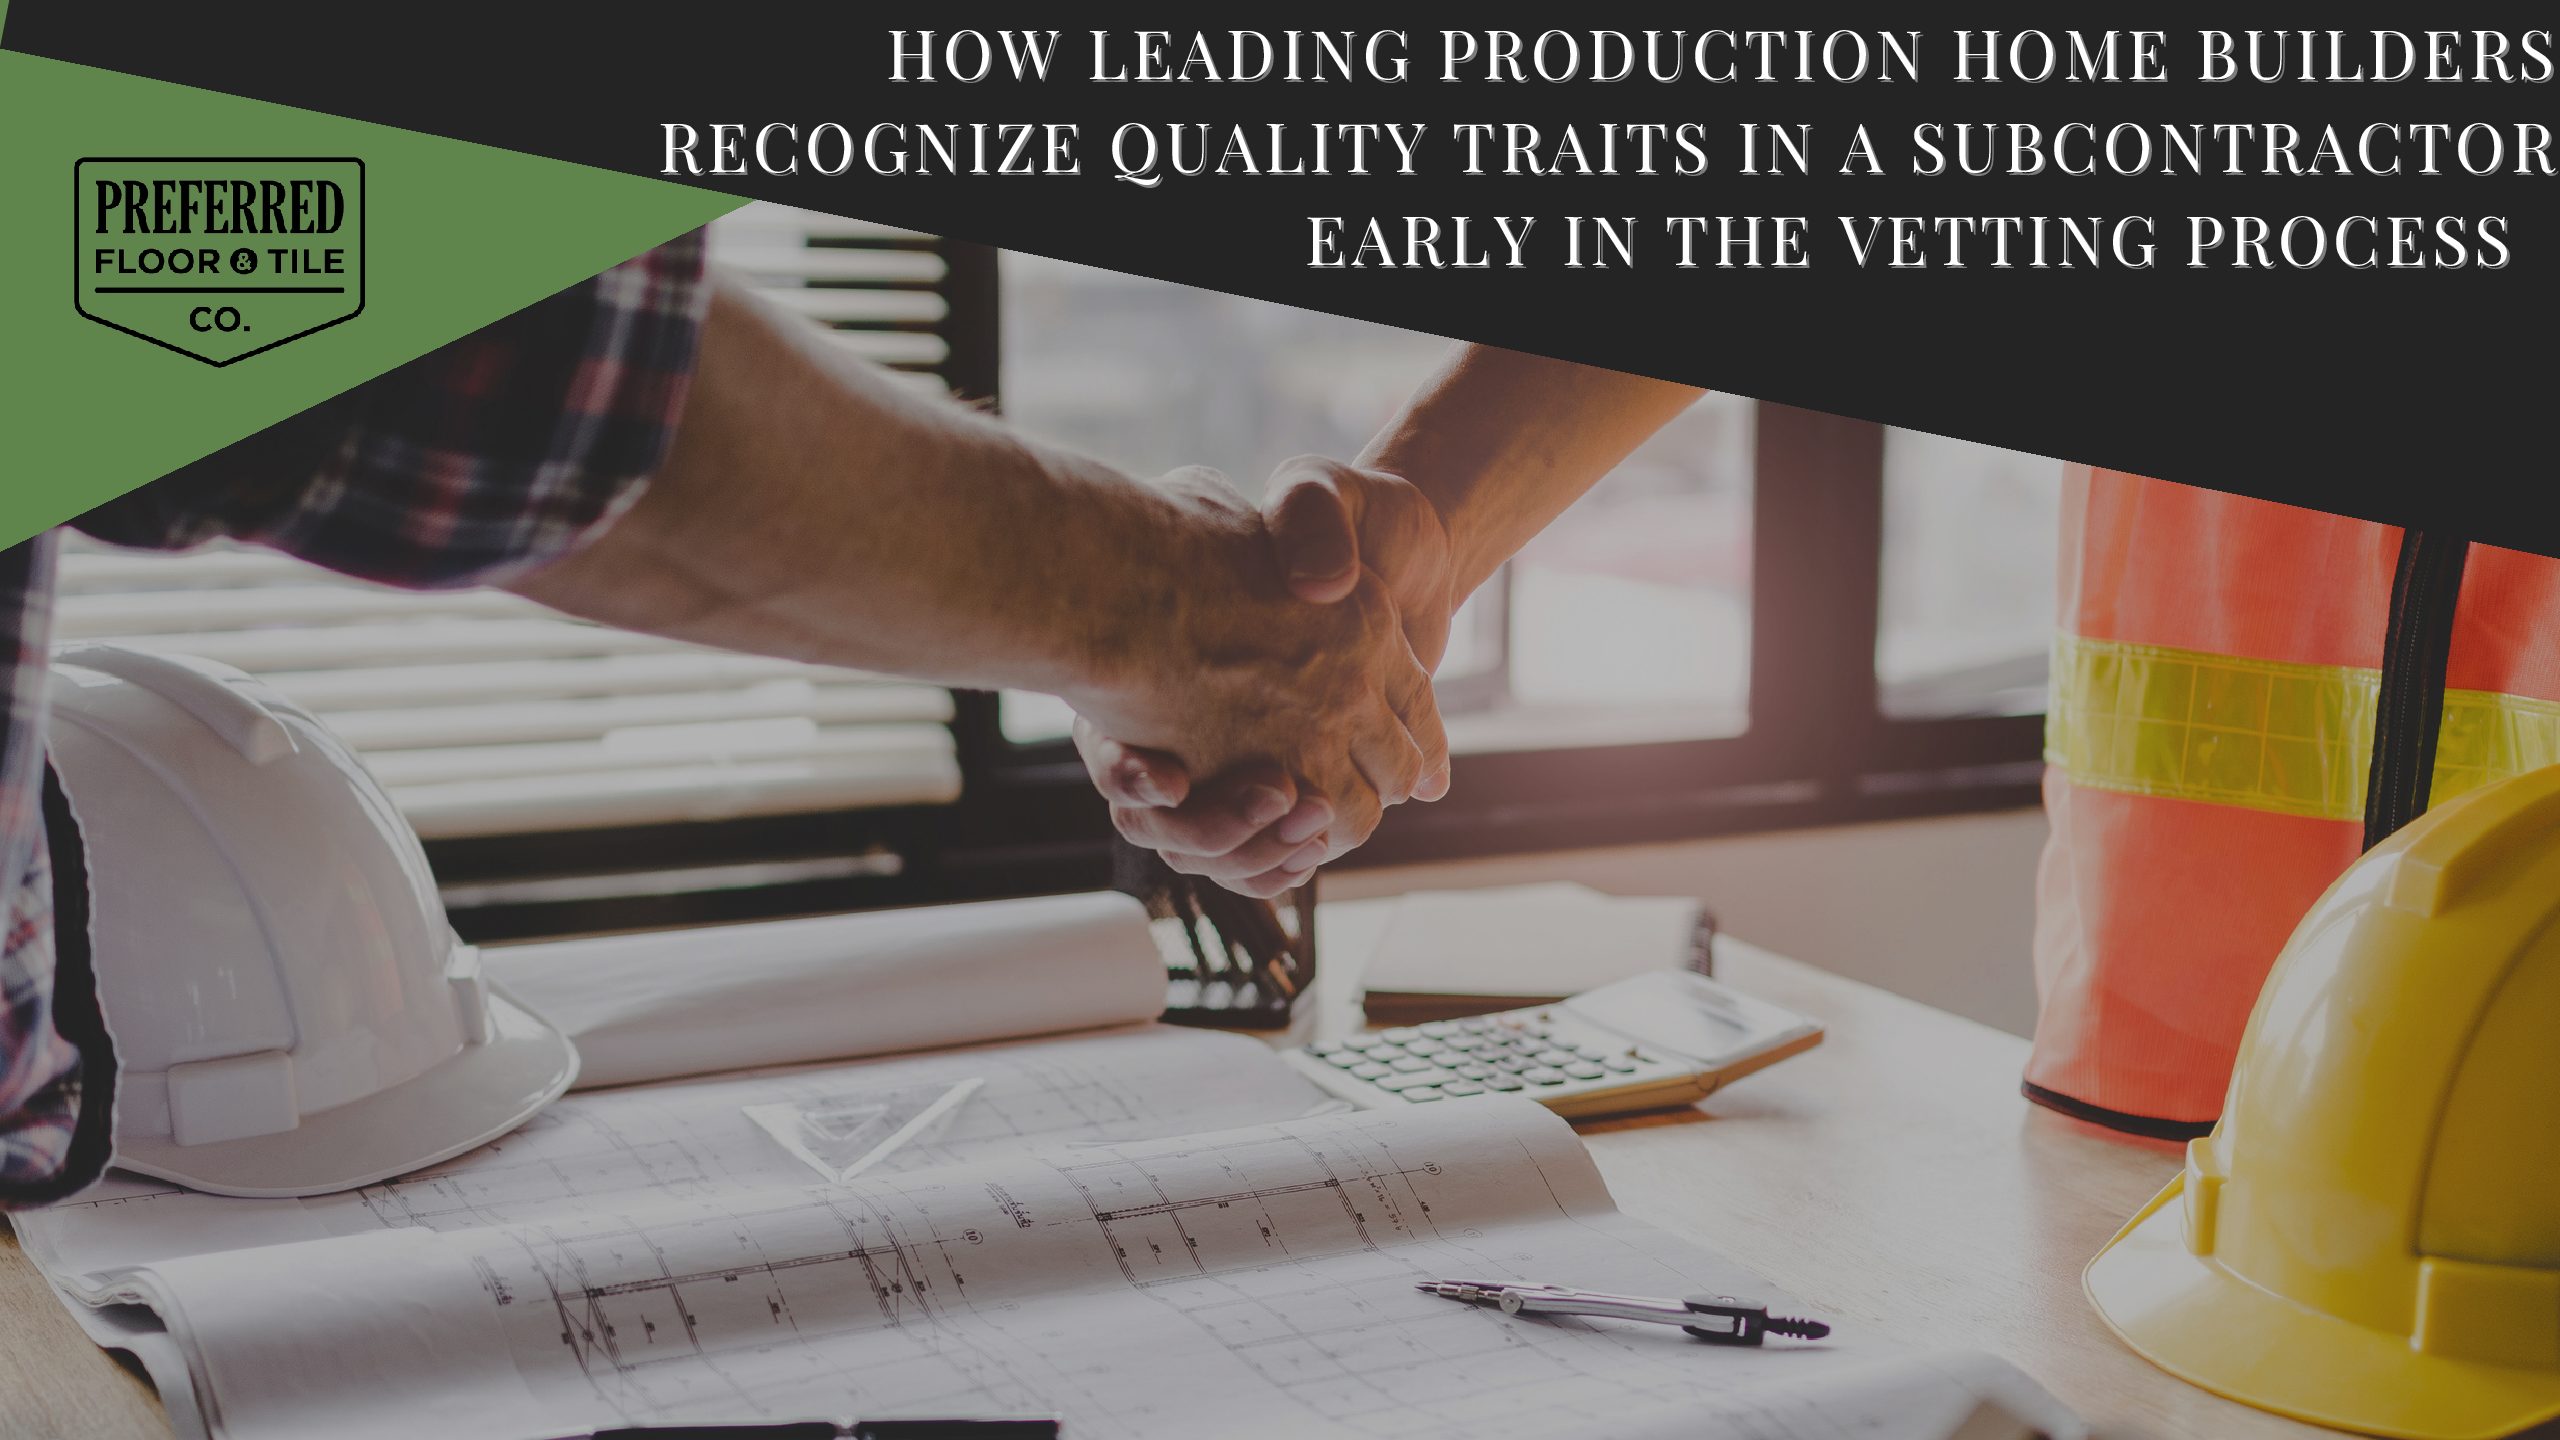 How Leading Production Home Builders Recognize Quality Traits in a Subcontractor Early in the Vetting Process